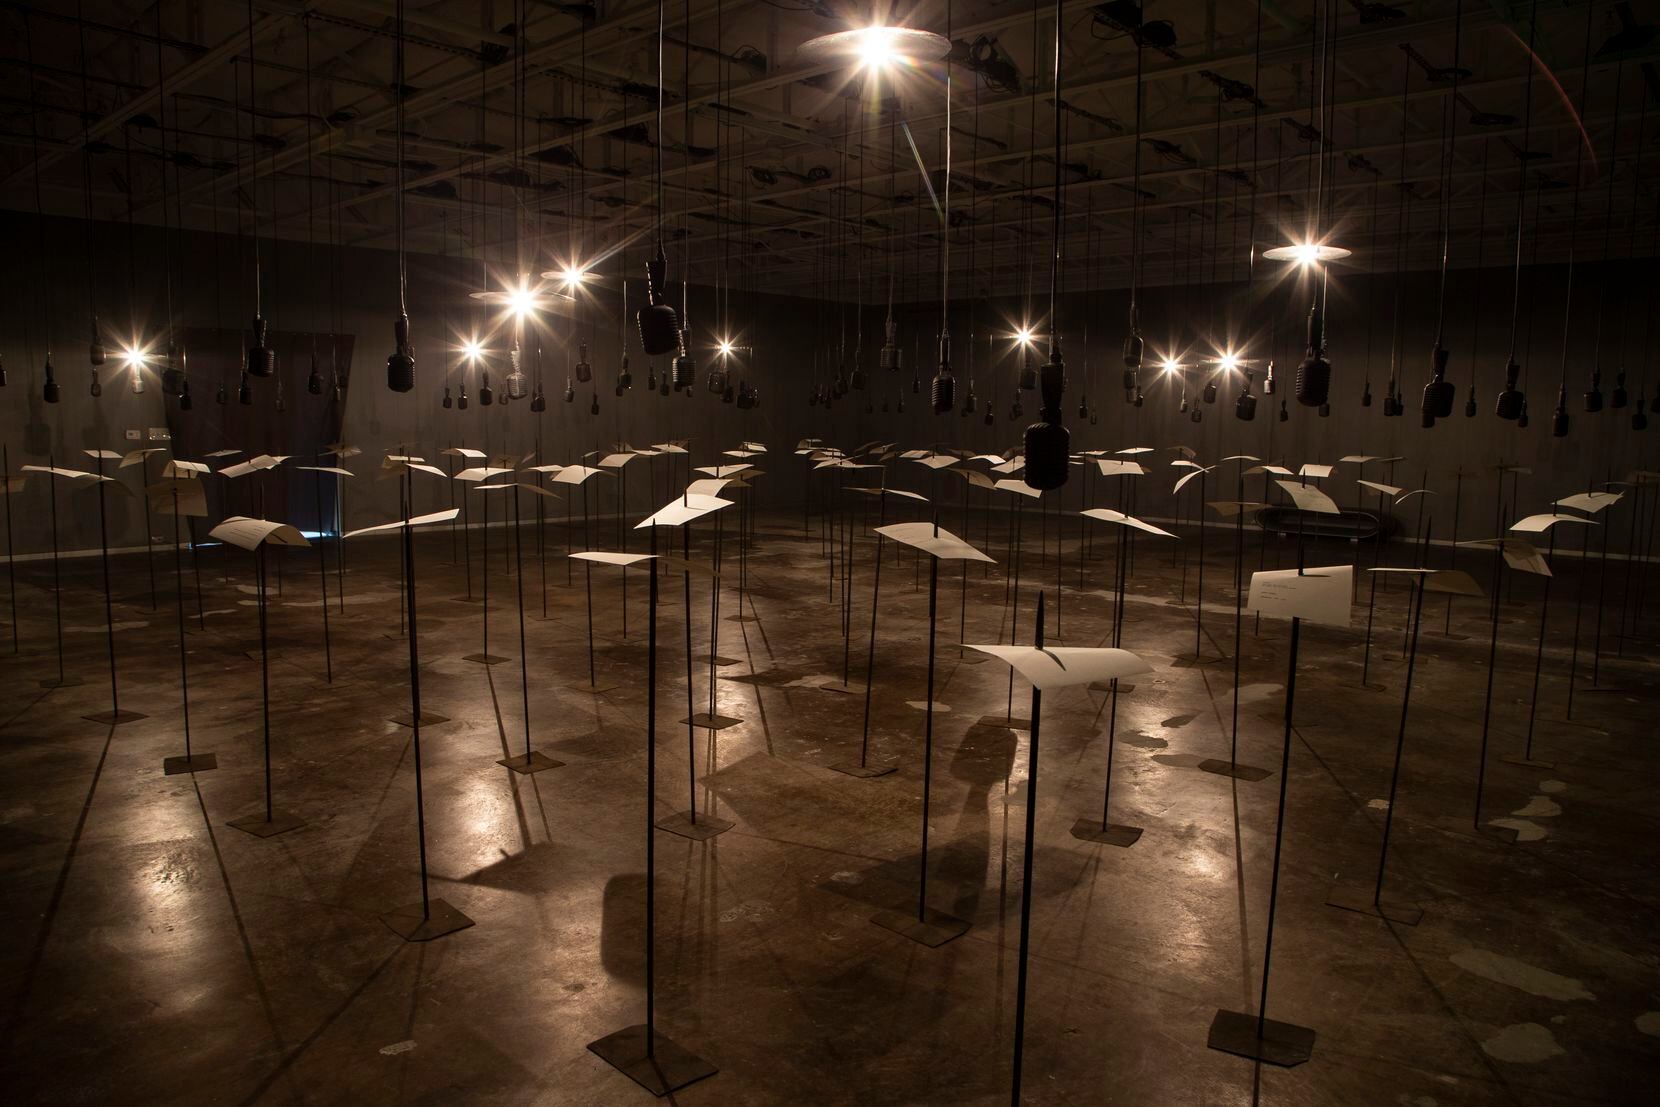 With his installation, Shilpa Gupta has created a moving tribute to artists who have been...